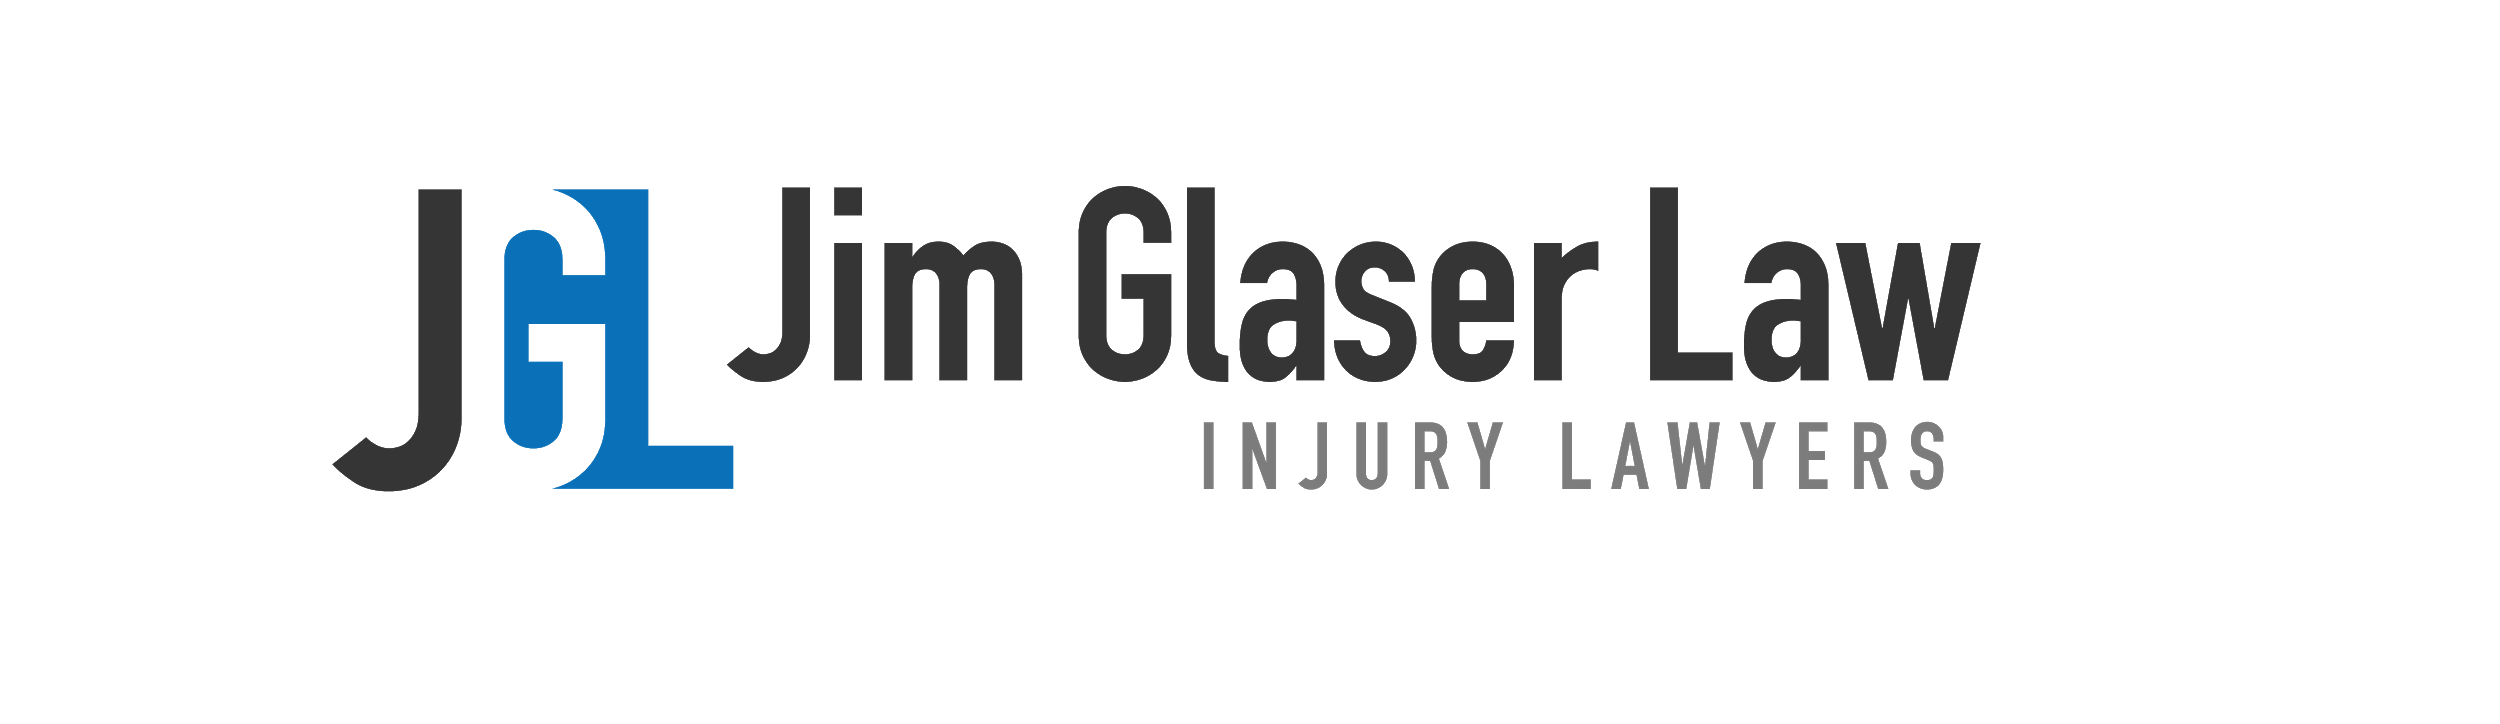 Jim Glaser Law Announces Safe Driver Scholarship | Newswire